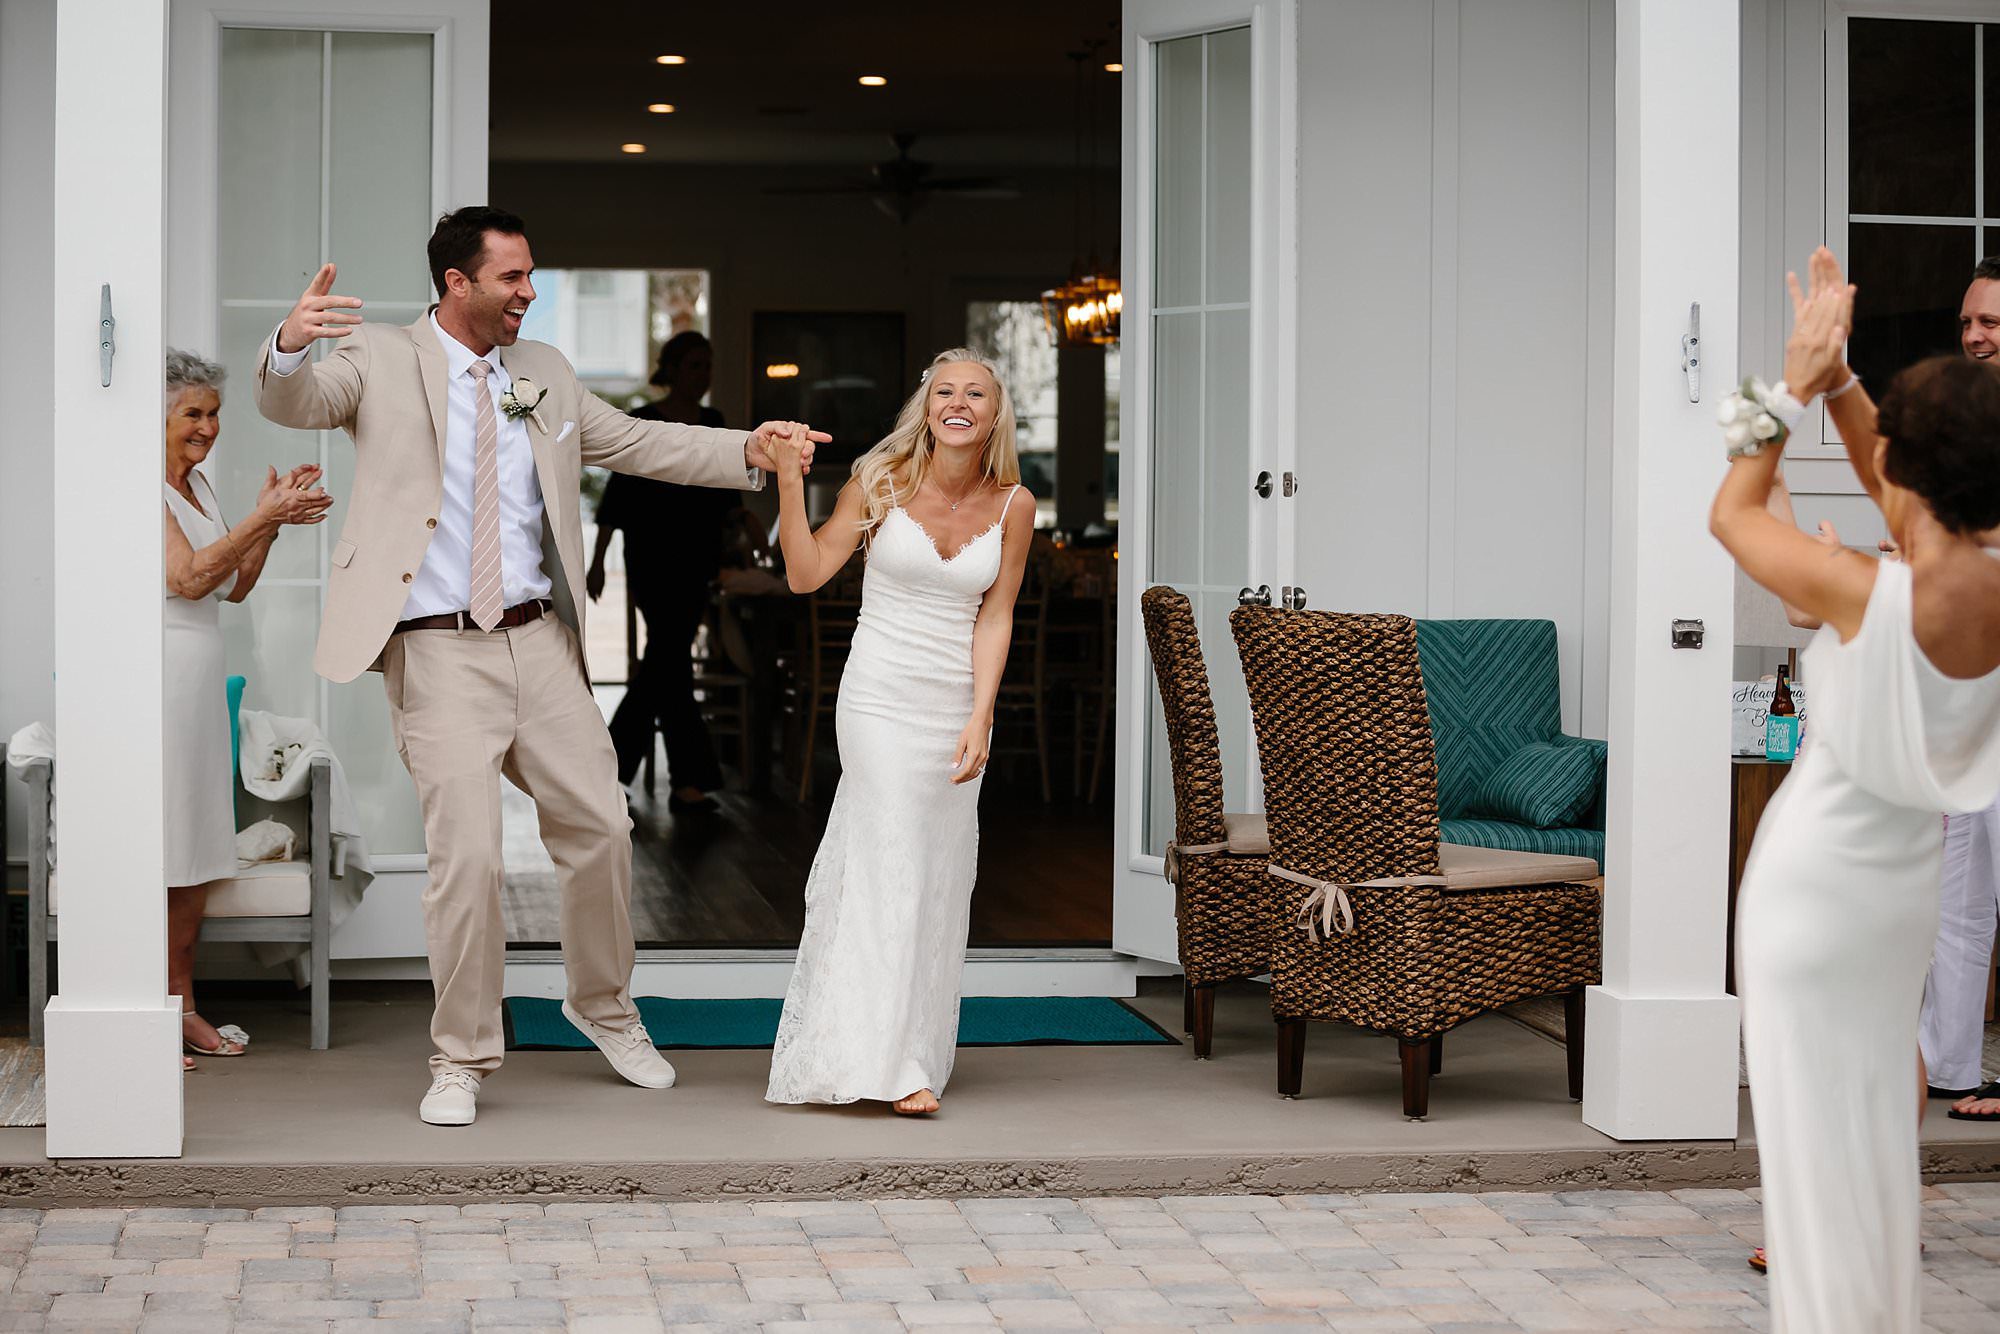 Bride and Groom grand entrance into wedding reception at beach house in Destin